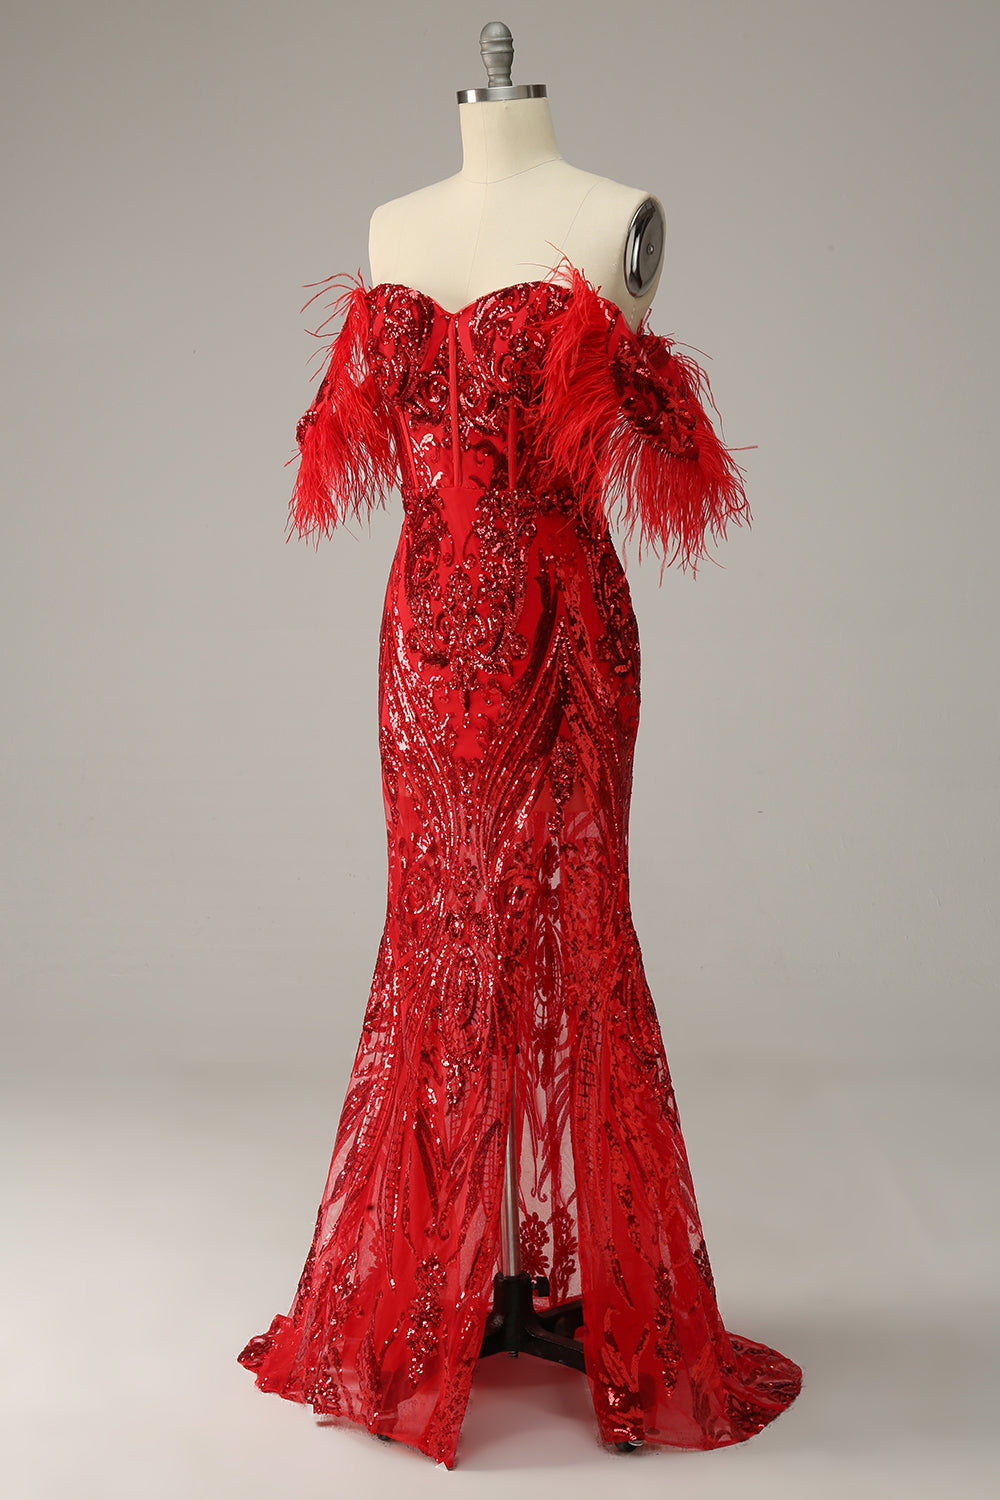 Trinity's evening gown deserves more recognition : r/rupaulsdragrace